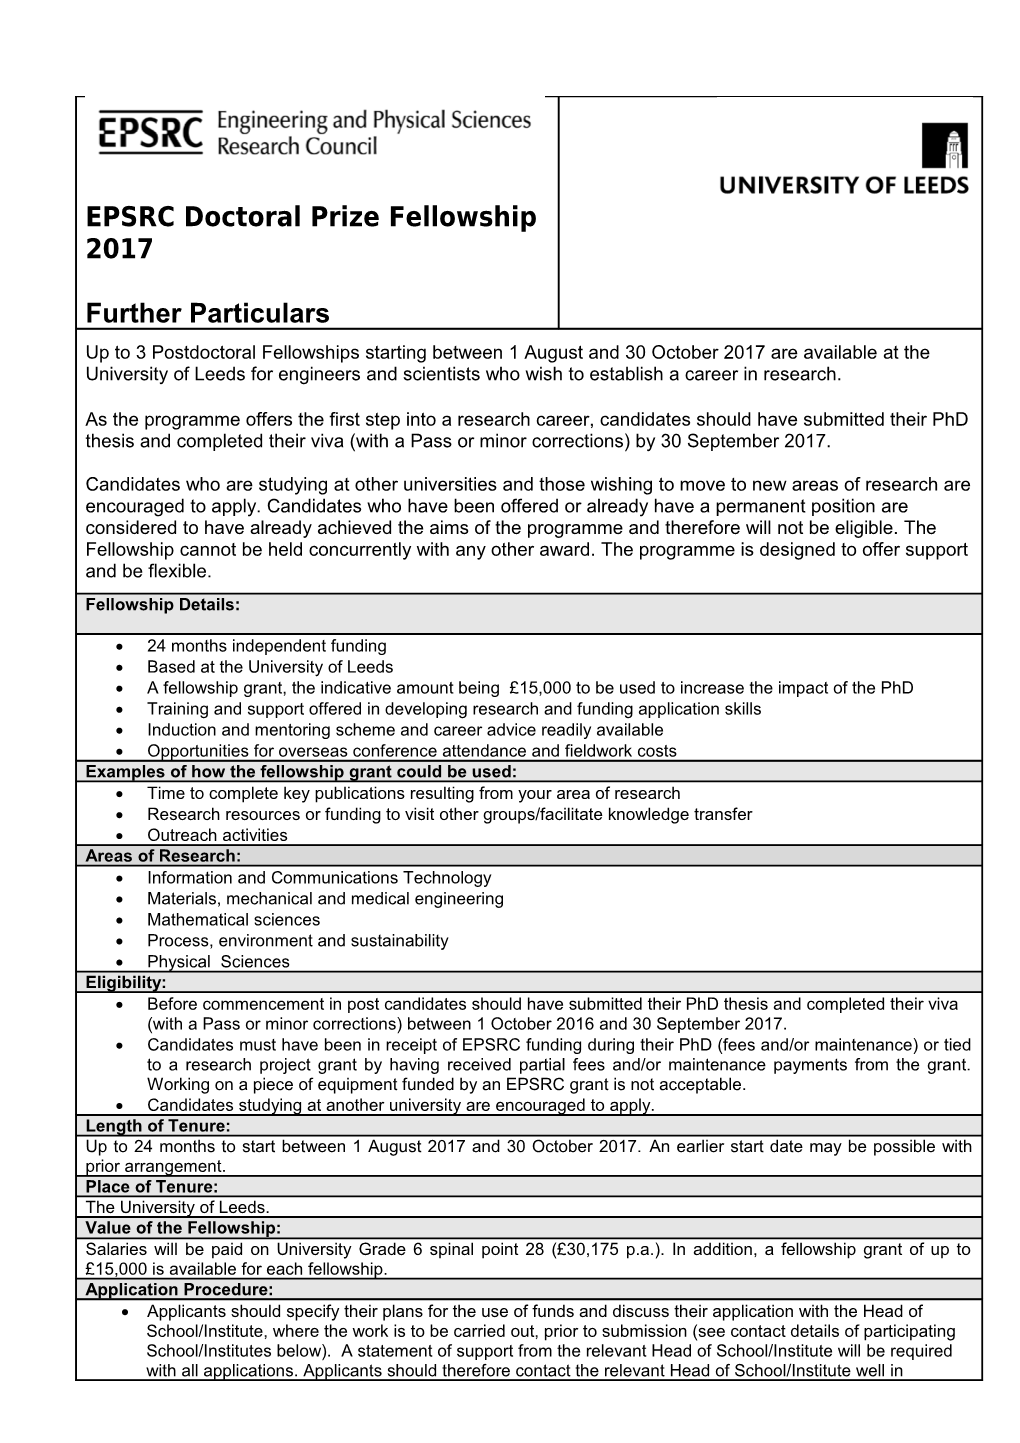 EPSRC Doctoral Prize Fellowship Further Particulars